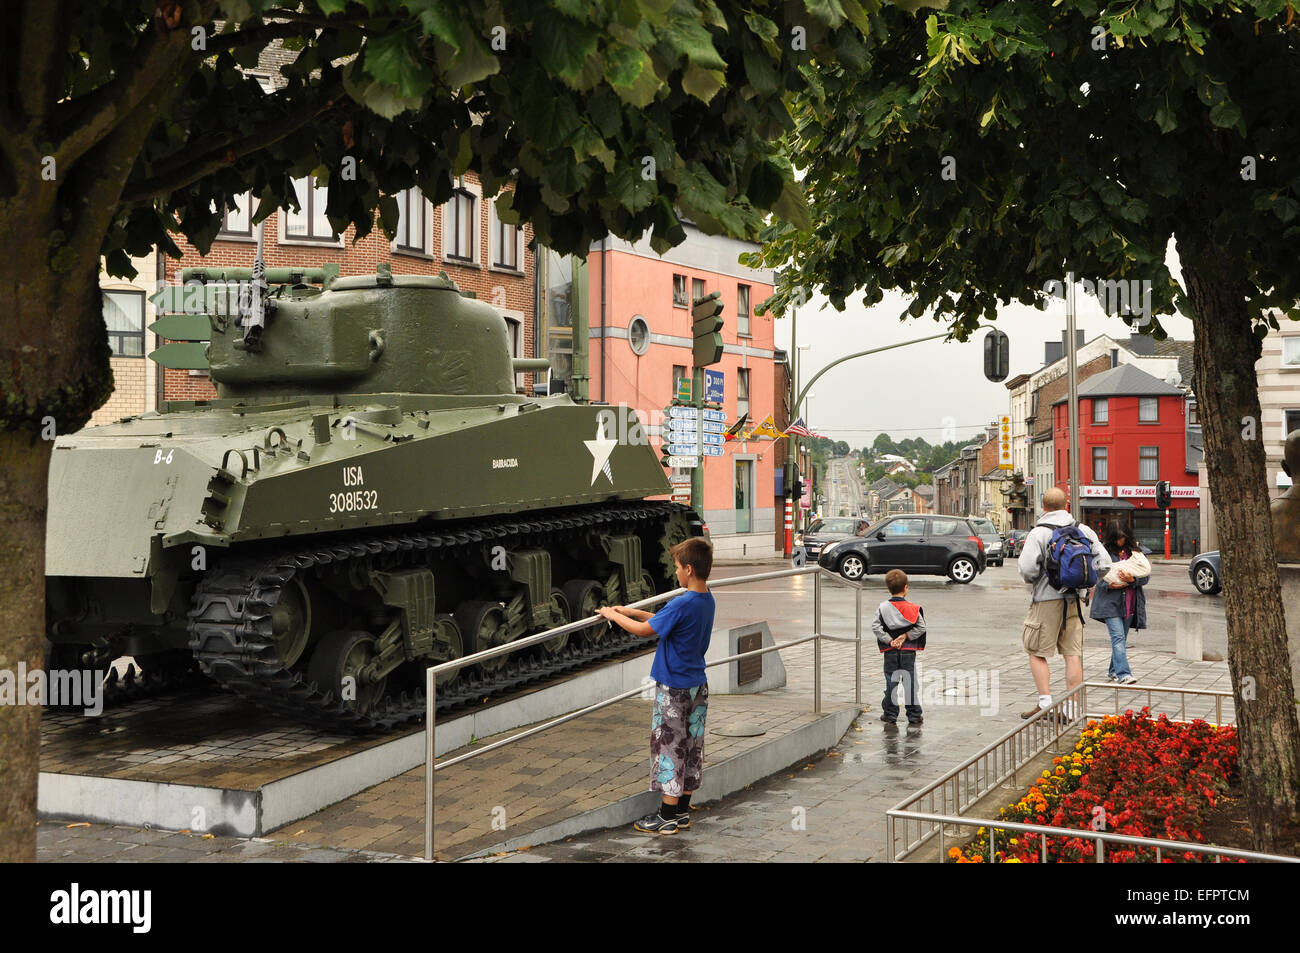 BASTOGNE, BELGIUM - August 2010: An American Sherman tank of the 11th Armored Division showed for public on a square in Bastogne Stock Photo